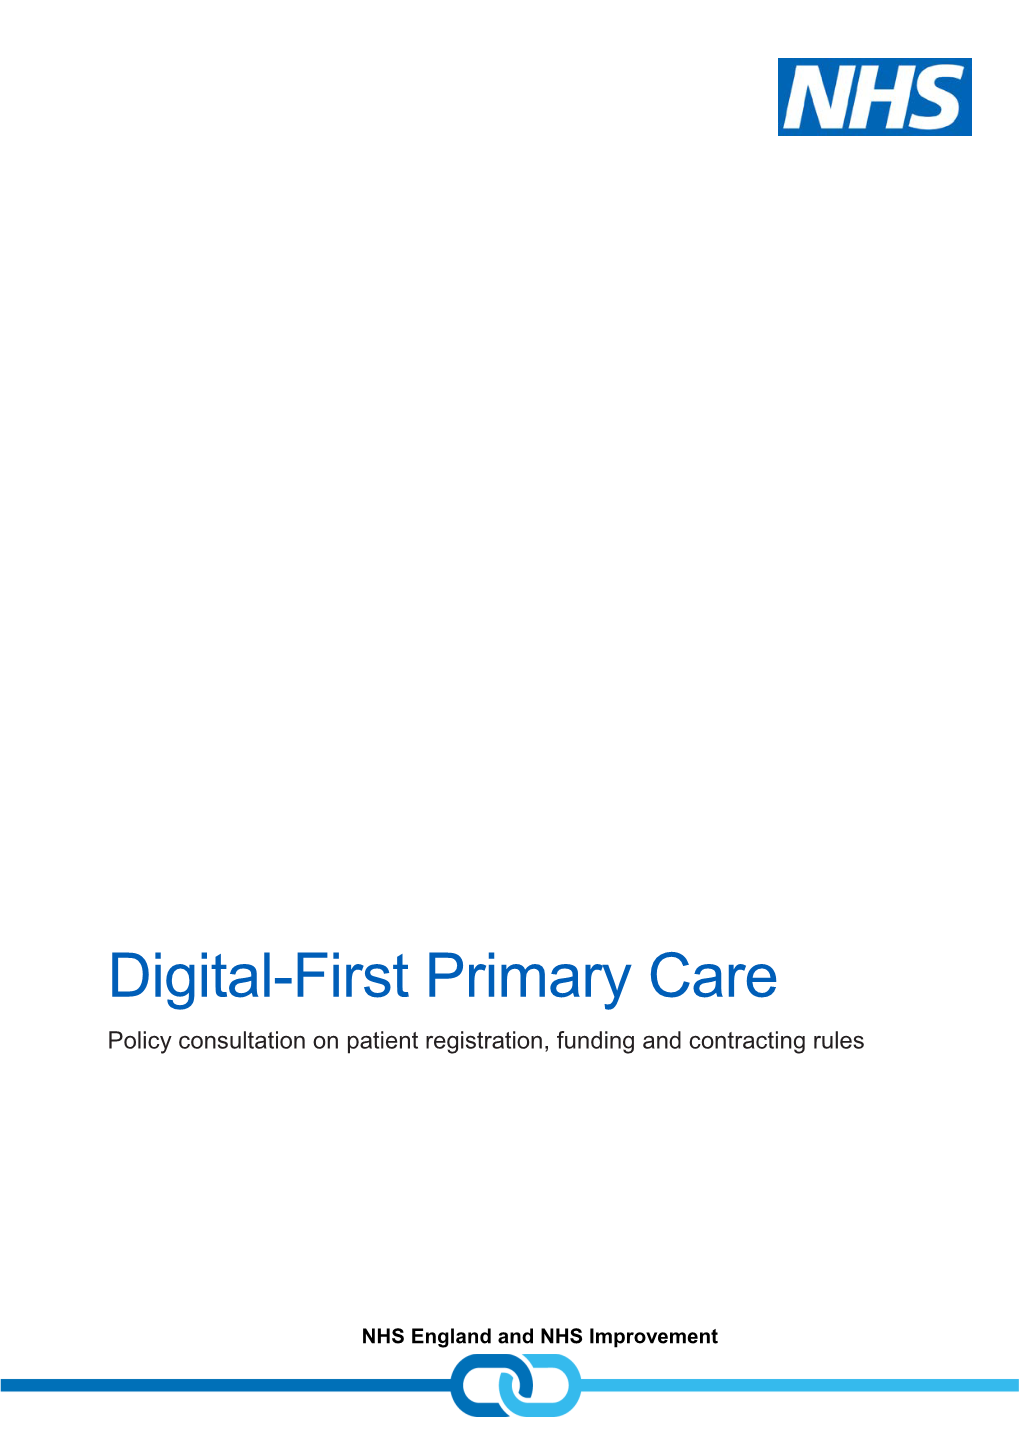 Digital-First Primary Care Policy Consultation on Patient Registration, Funding and Contracting Rules